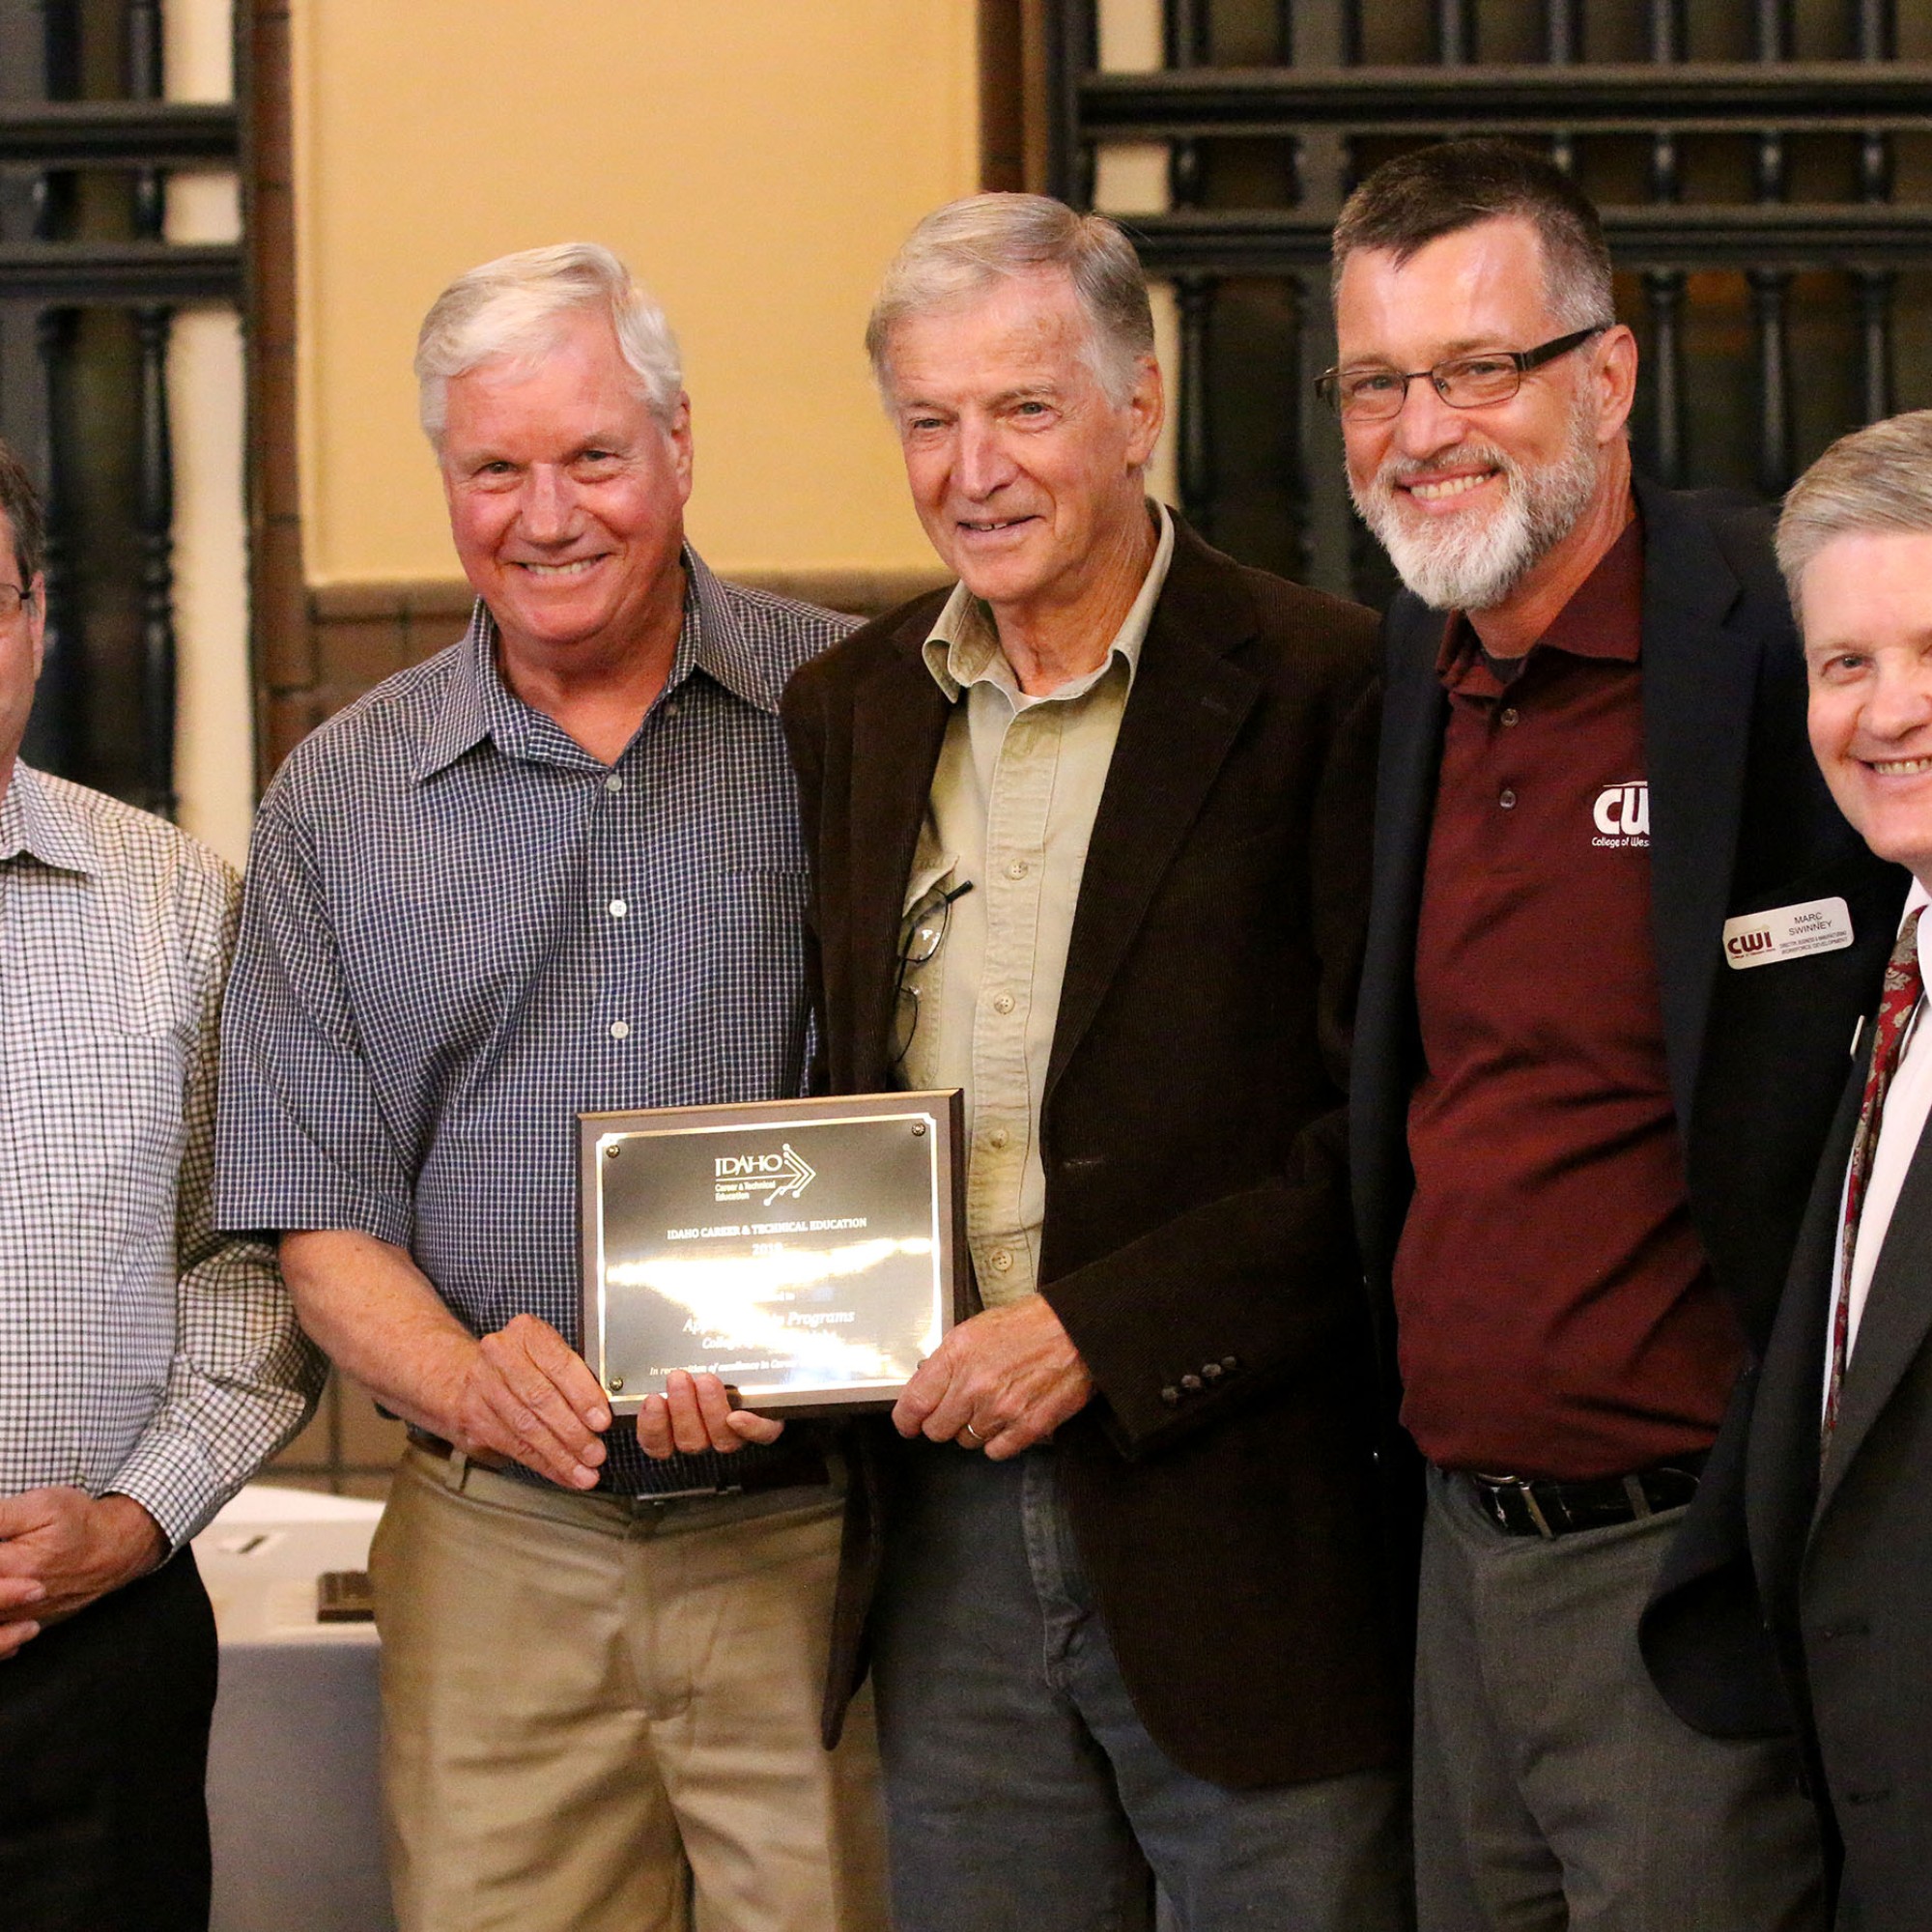 CWI Apprenticeship programs honored during annual Career and Technical Education conference.